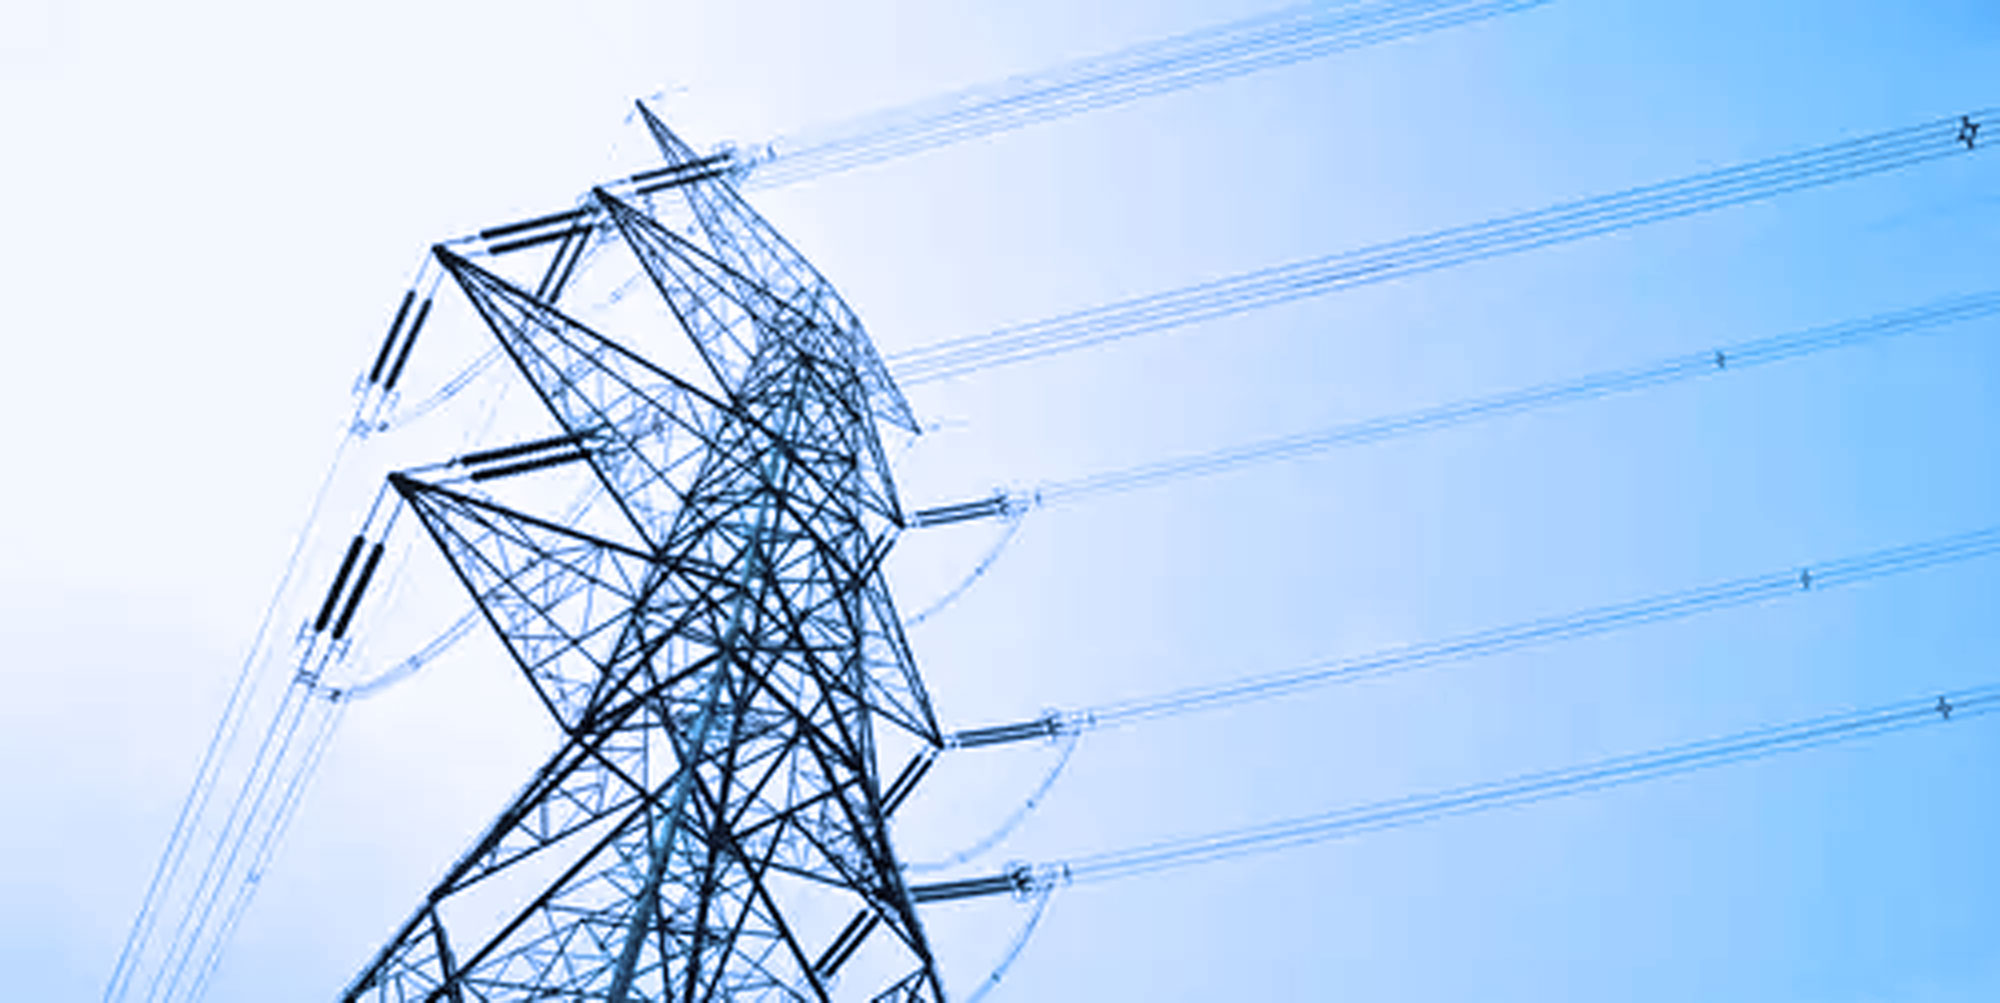 Maintenance of transmission lines | Electrical & Power Review